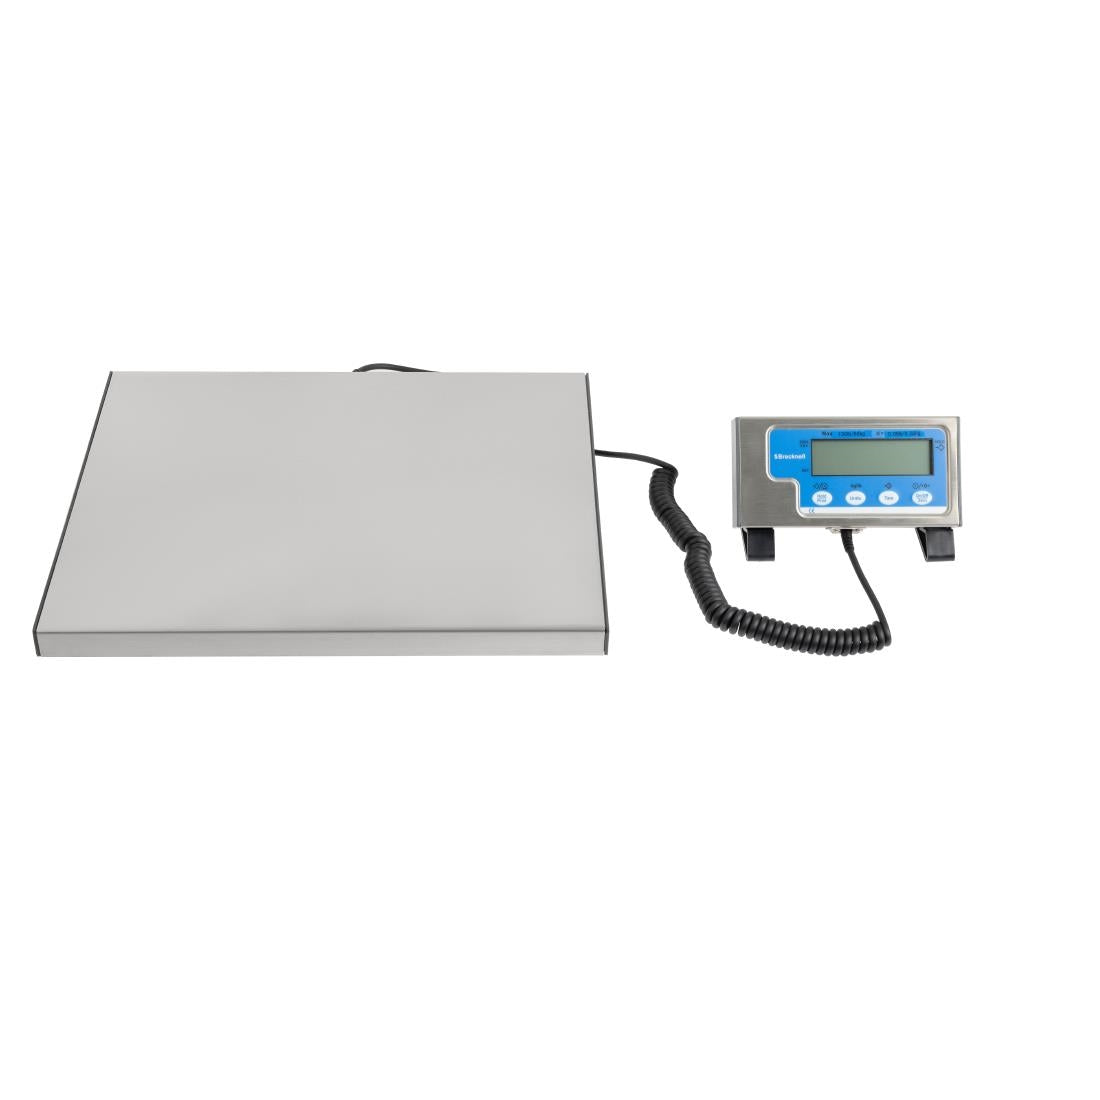 DP033 Salter Bench Scales 60kg WS60 JD Catering Equipment Solutions Ltd